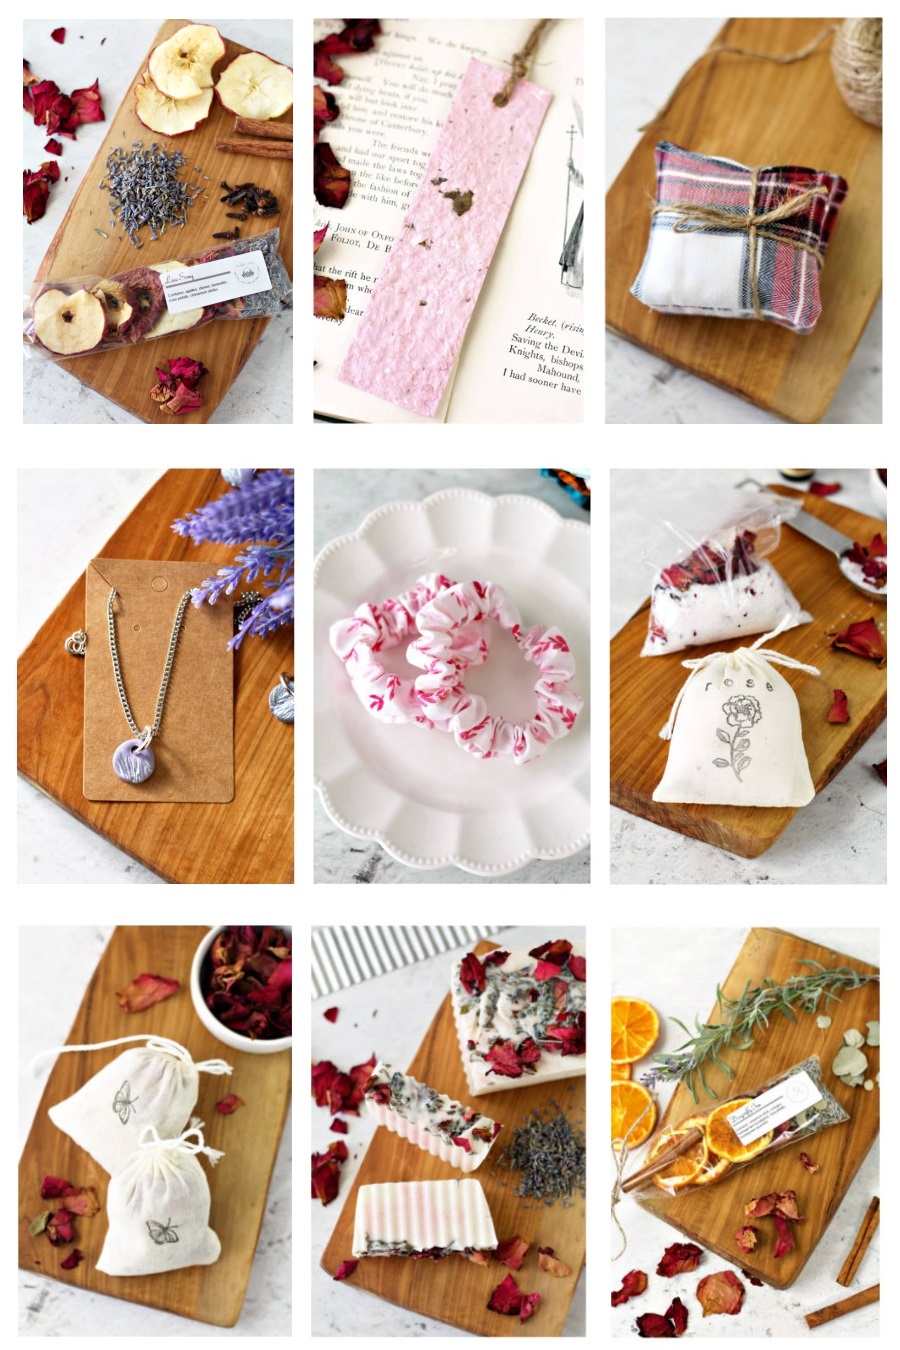 Collage of Valentine's Day items from Holoka Home on Etsy. Items include simmer pot kits, handmade bookmarks, hand warmers, herb pressed jewelry, scrunchies, bath salts, sachets, and floral soap.